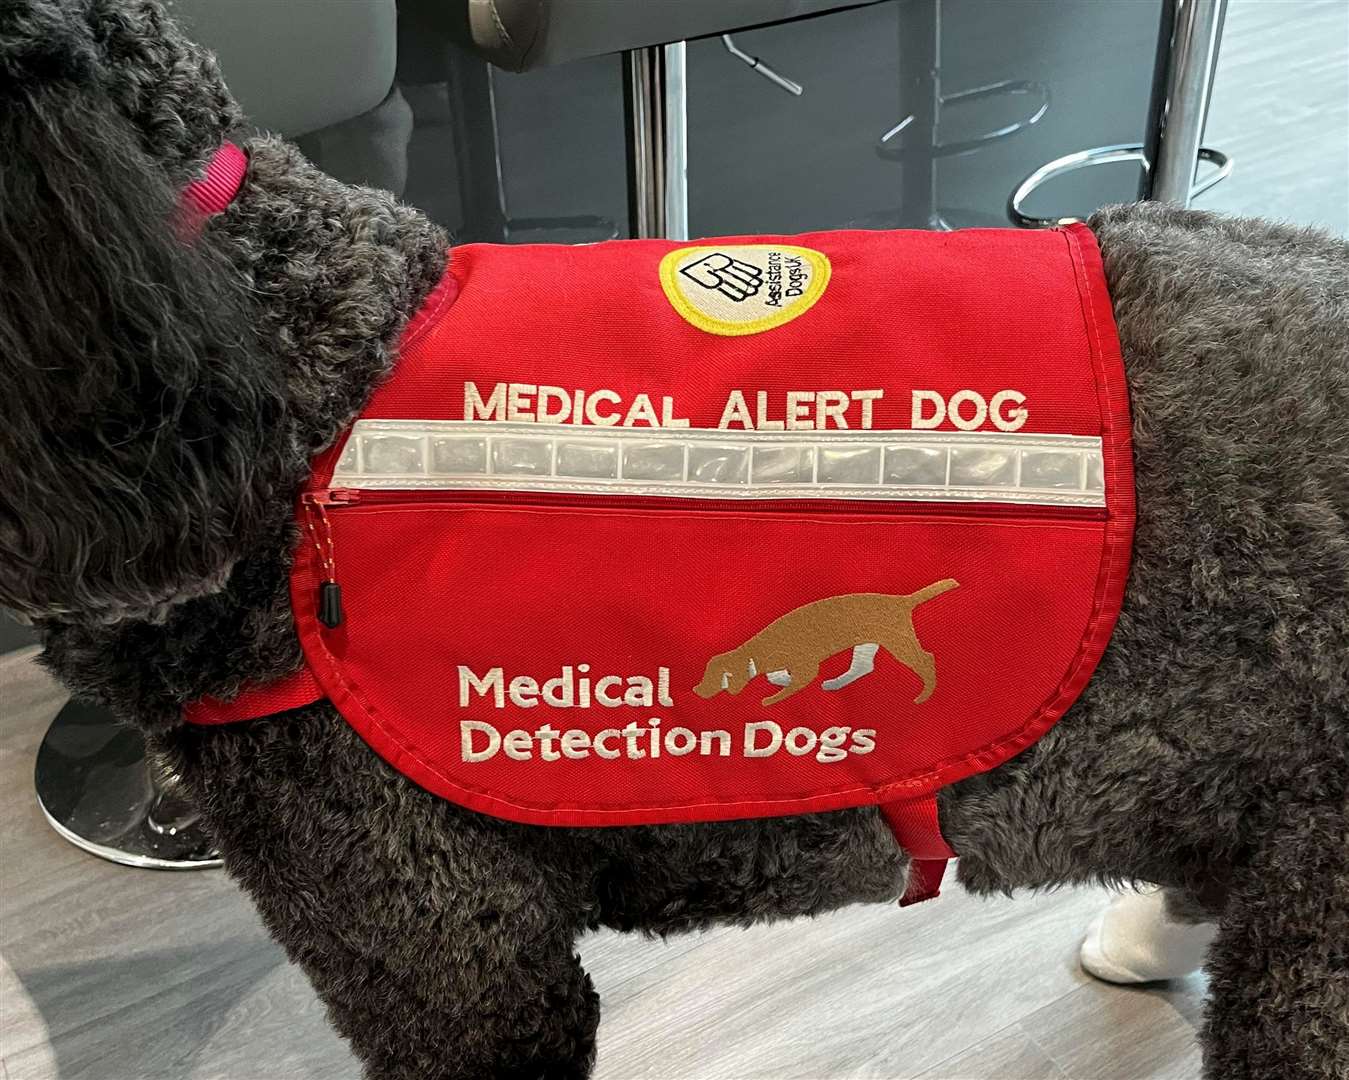 Teddy is a trained medical detection dog